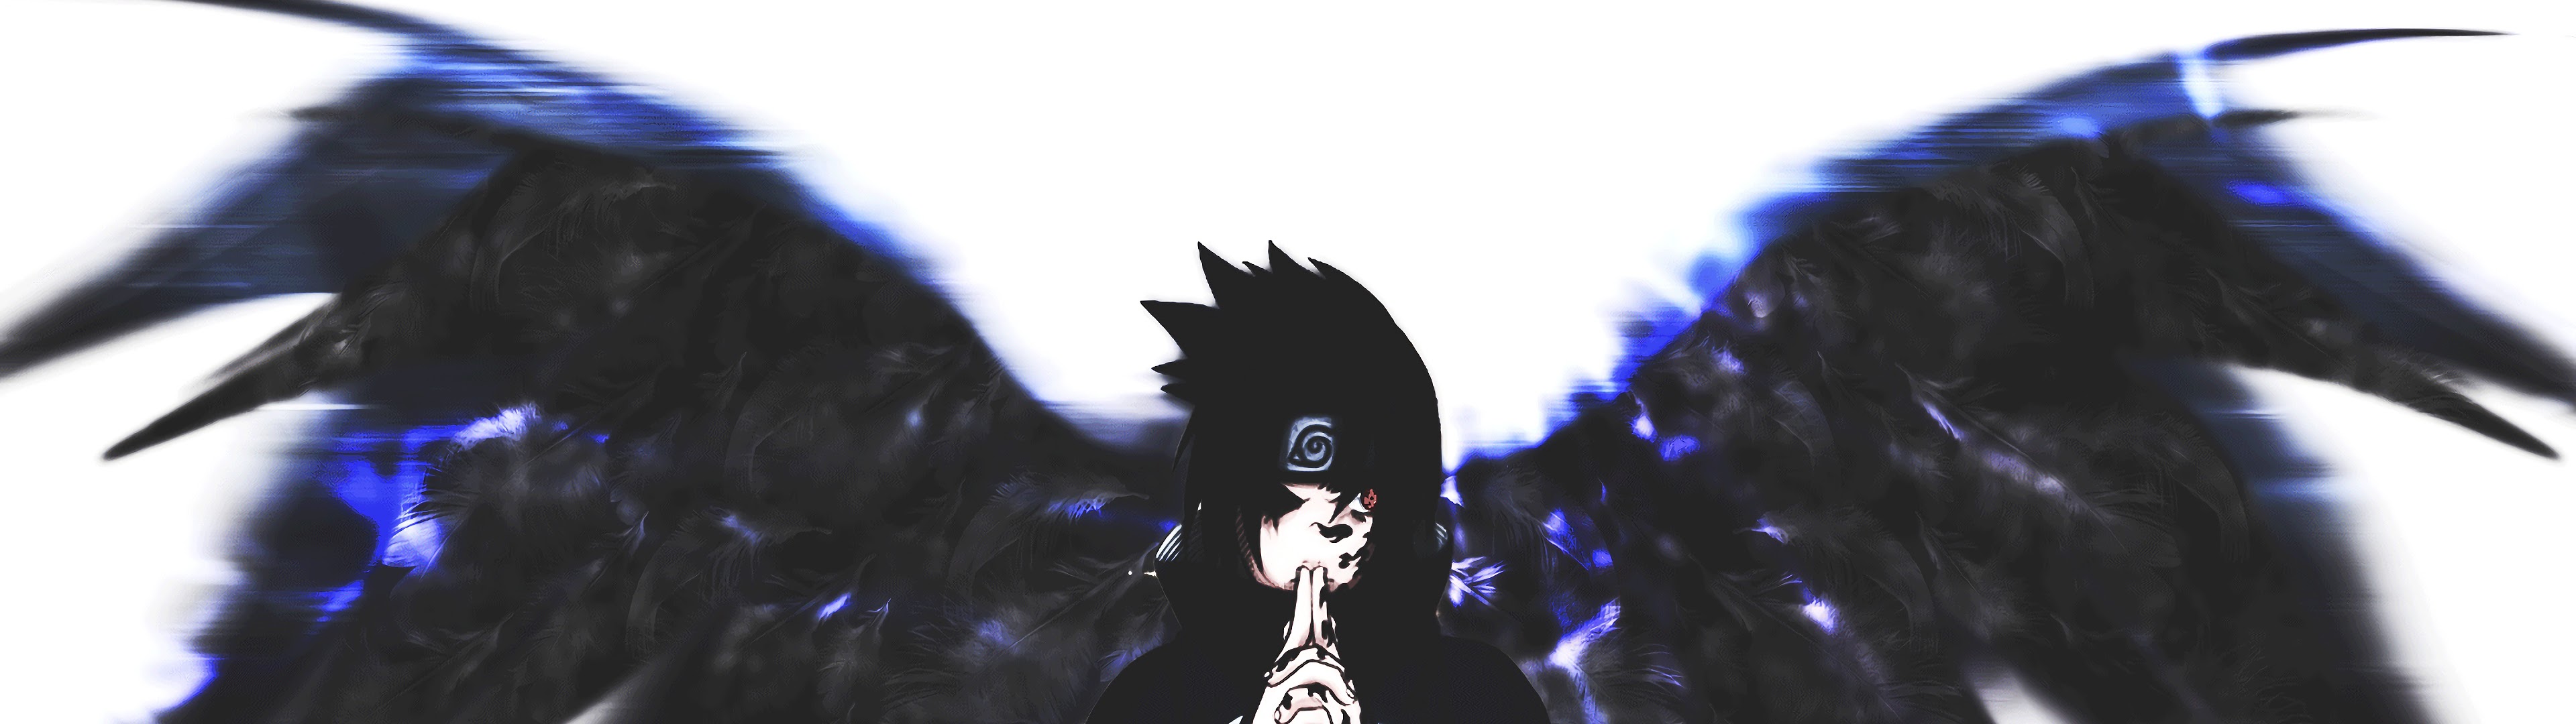 Itachi Wallpaper Dual Monitor / Itachi Crow Sharingan 4k Wallpaper 1, Download HD dual monitor wallpaper best collection